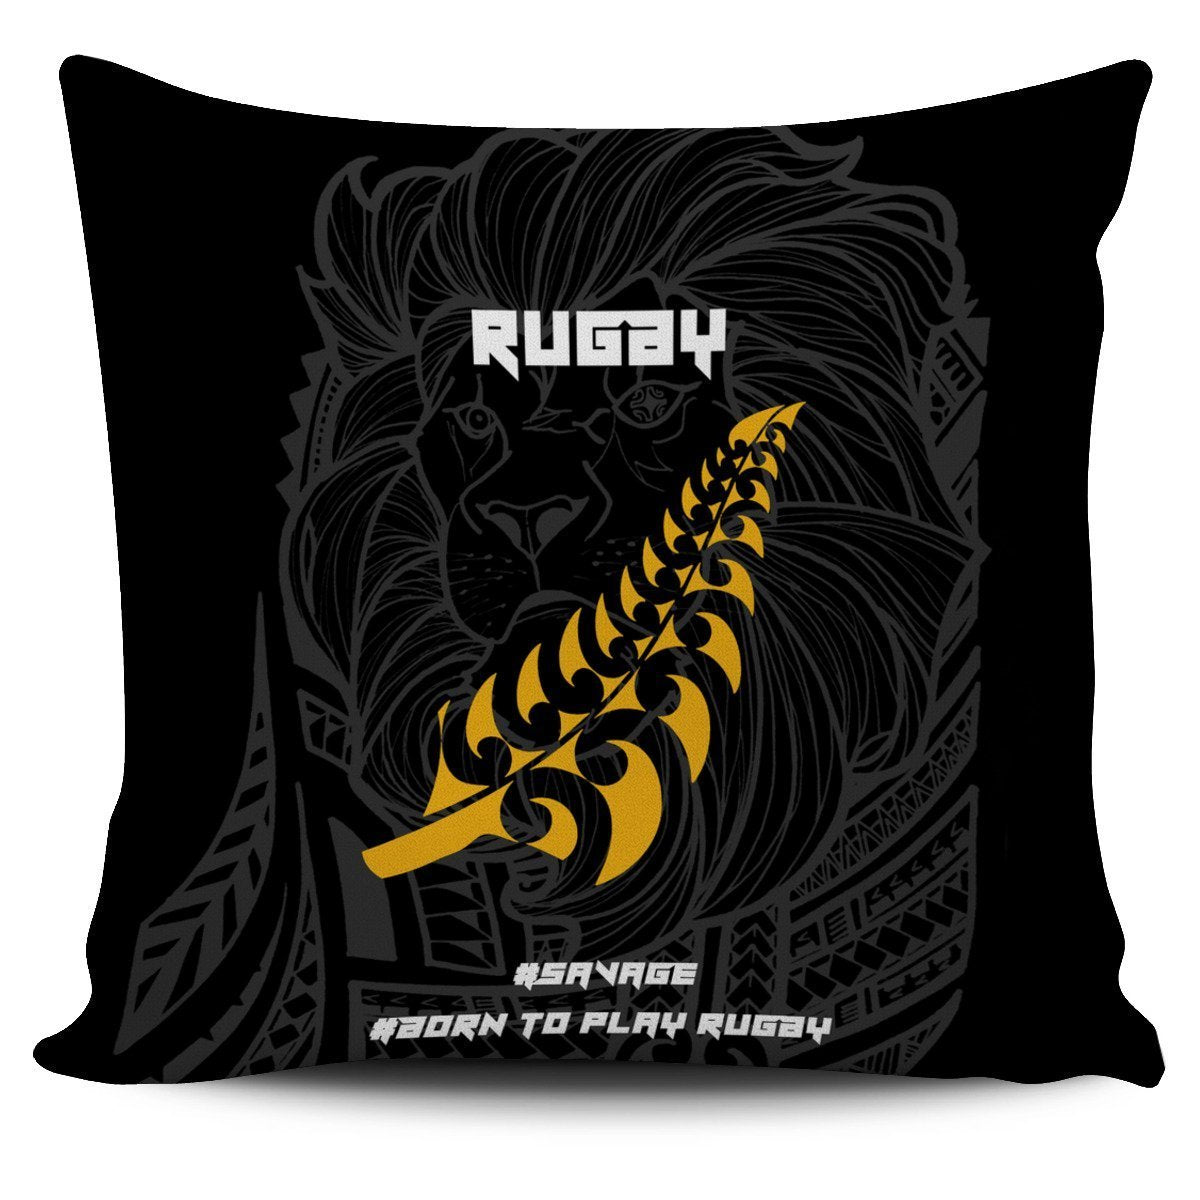 New Zealand Maori Lion Rugby Pillow Cover - Polynesian Pride